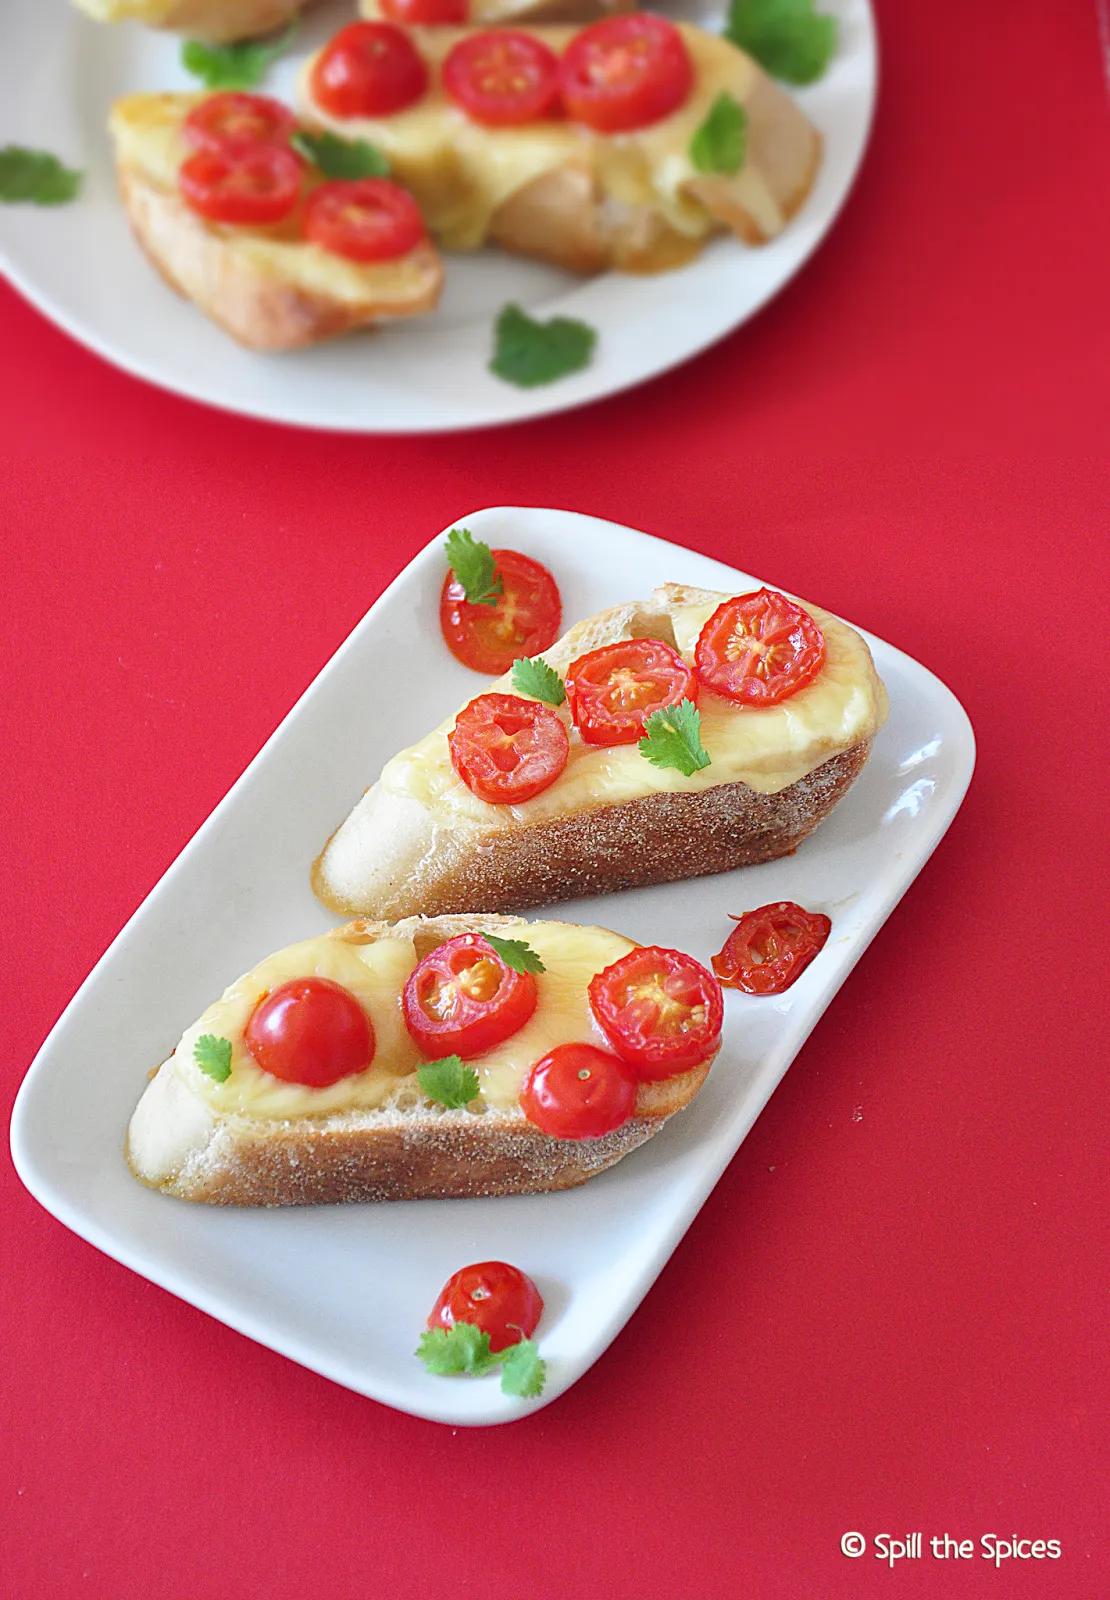 Crostini with Cherry Tomatoes and Mozzarella | Spill the Spices